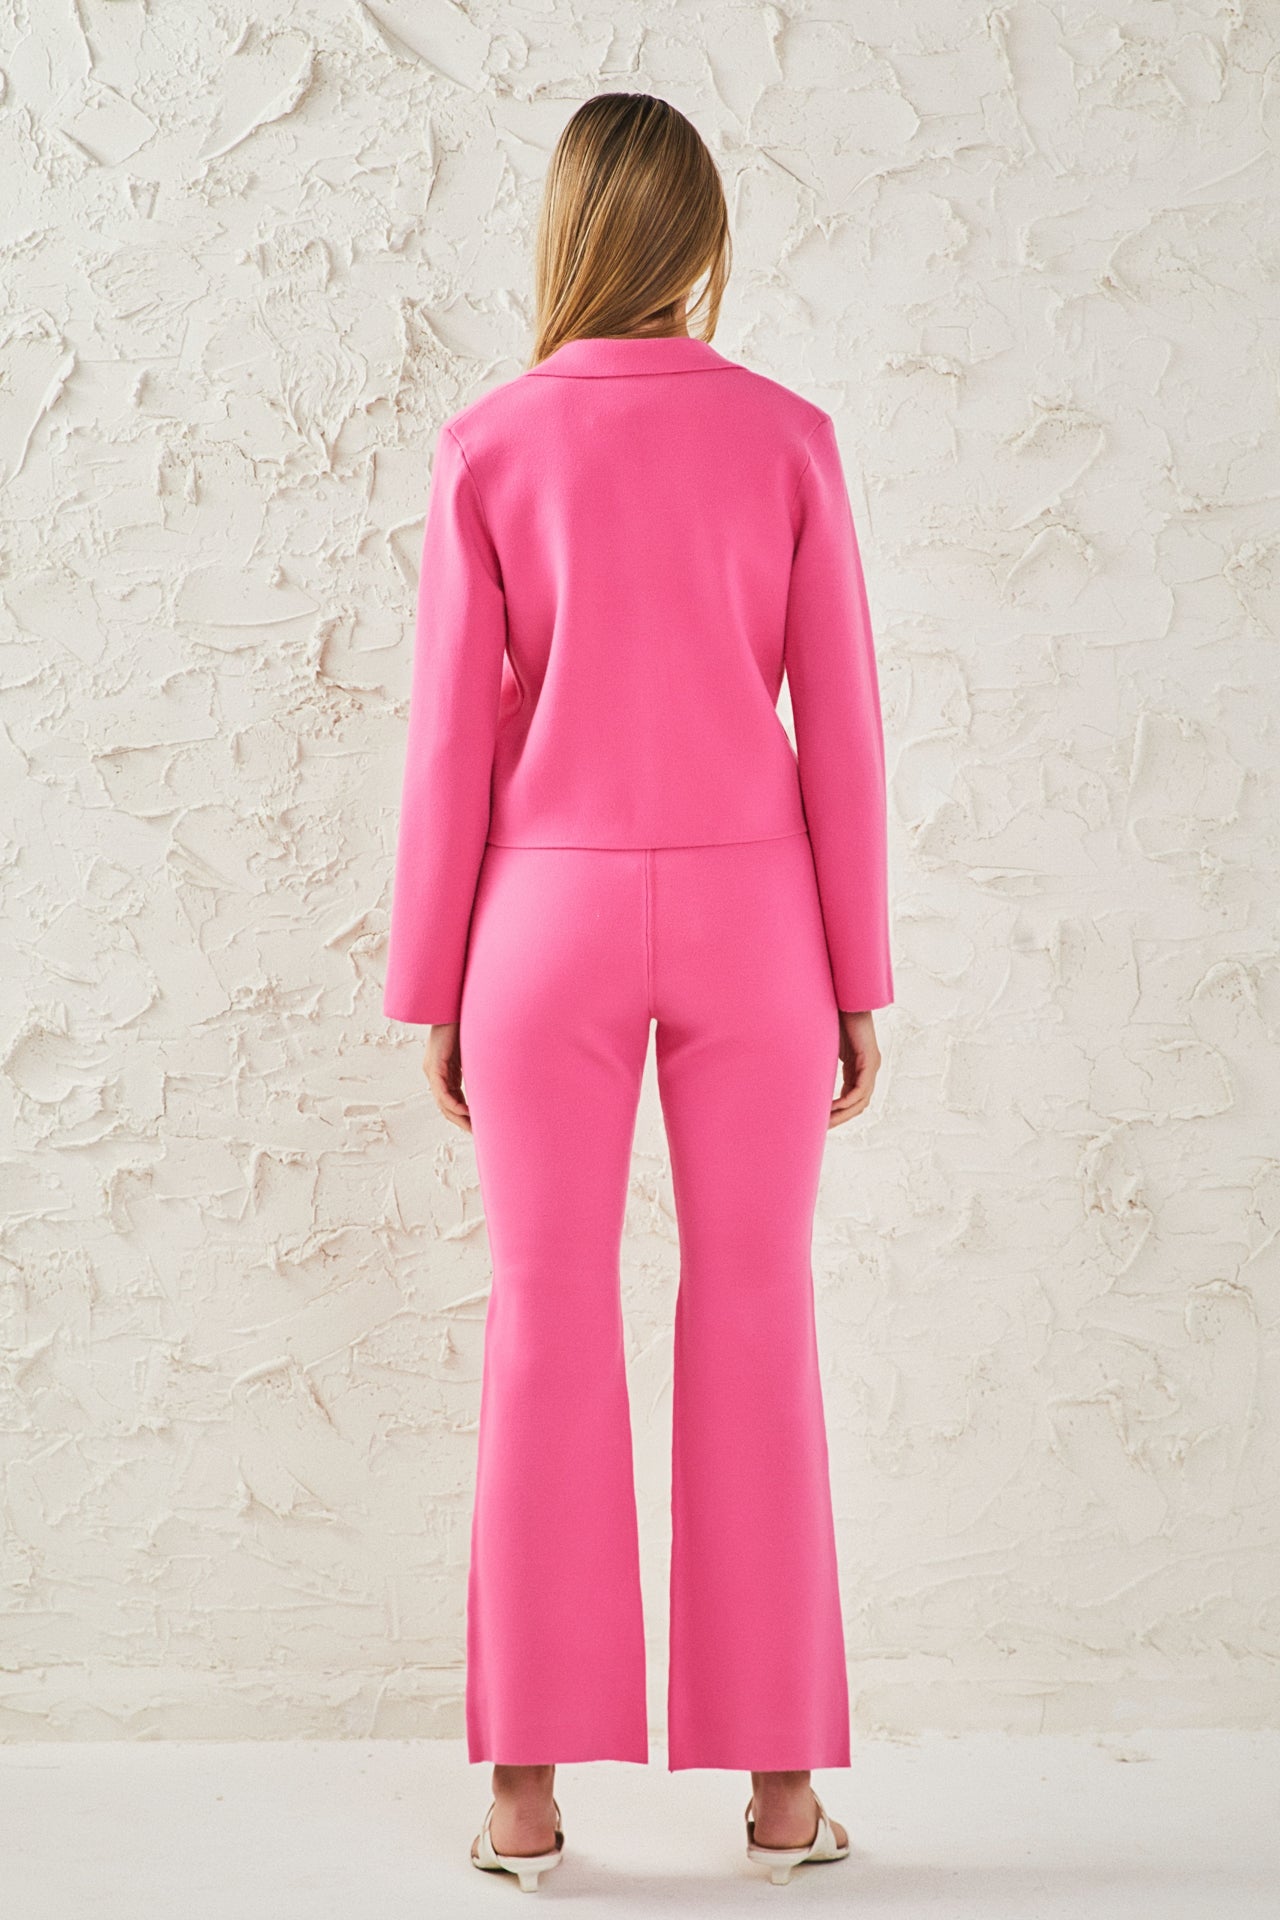 Hot Pink Pantsuit for Women, Pink Flared Pants Suit With Fitted Blazer,  Pink Formal Blazer Trouser for Women, Formal Womens Wear Office -   Canada